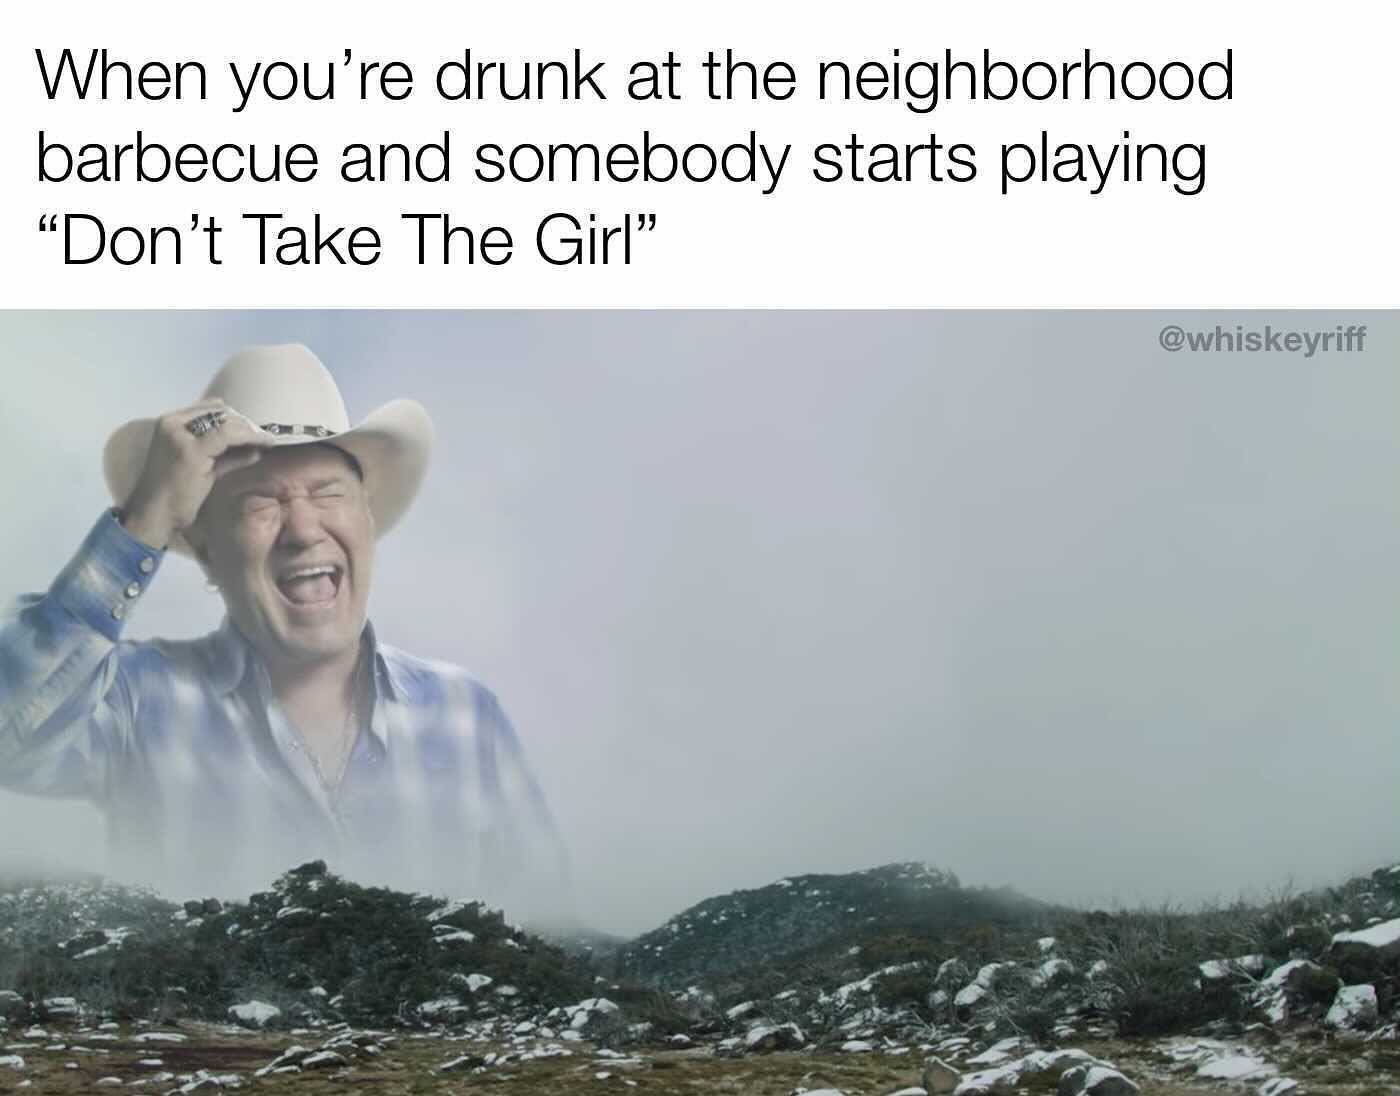 monday morning randomness - big enough - When you're drunk at the neighborhood barbecue and somebody starts playing "Don't Take The Girl"